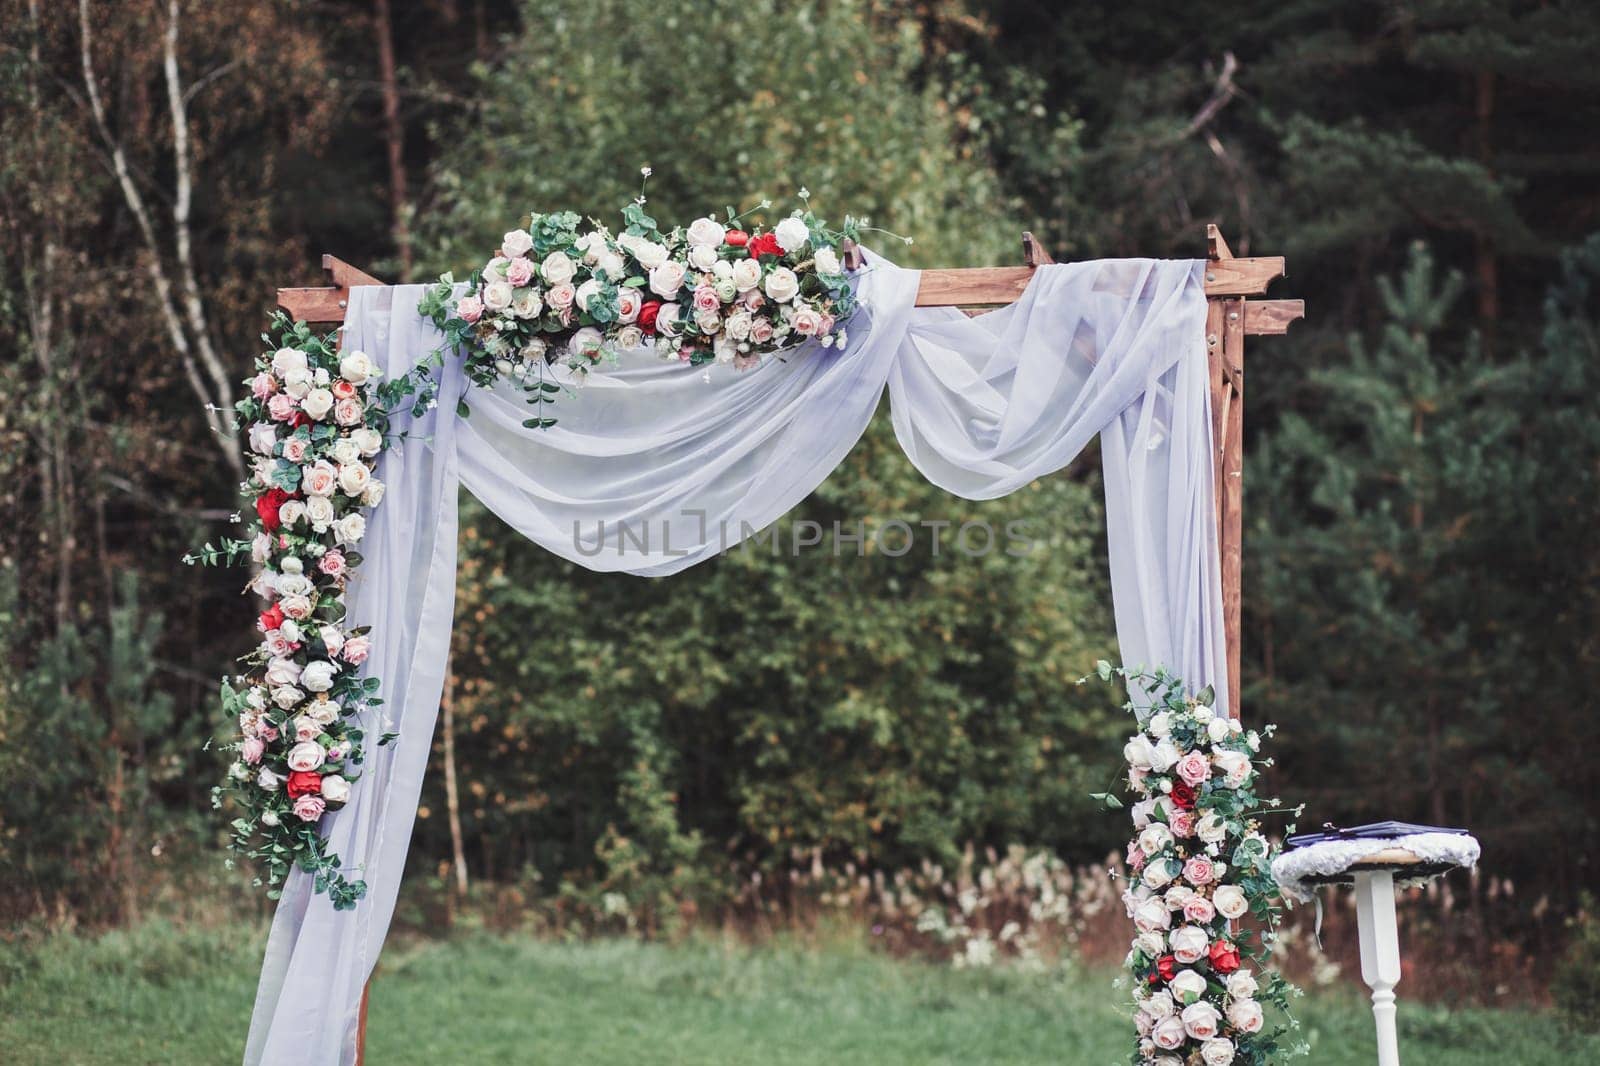 Beautiful wedding ceremony outdoors. Wedding arch made of cloth and flowers